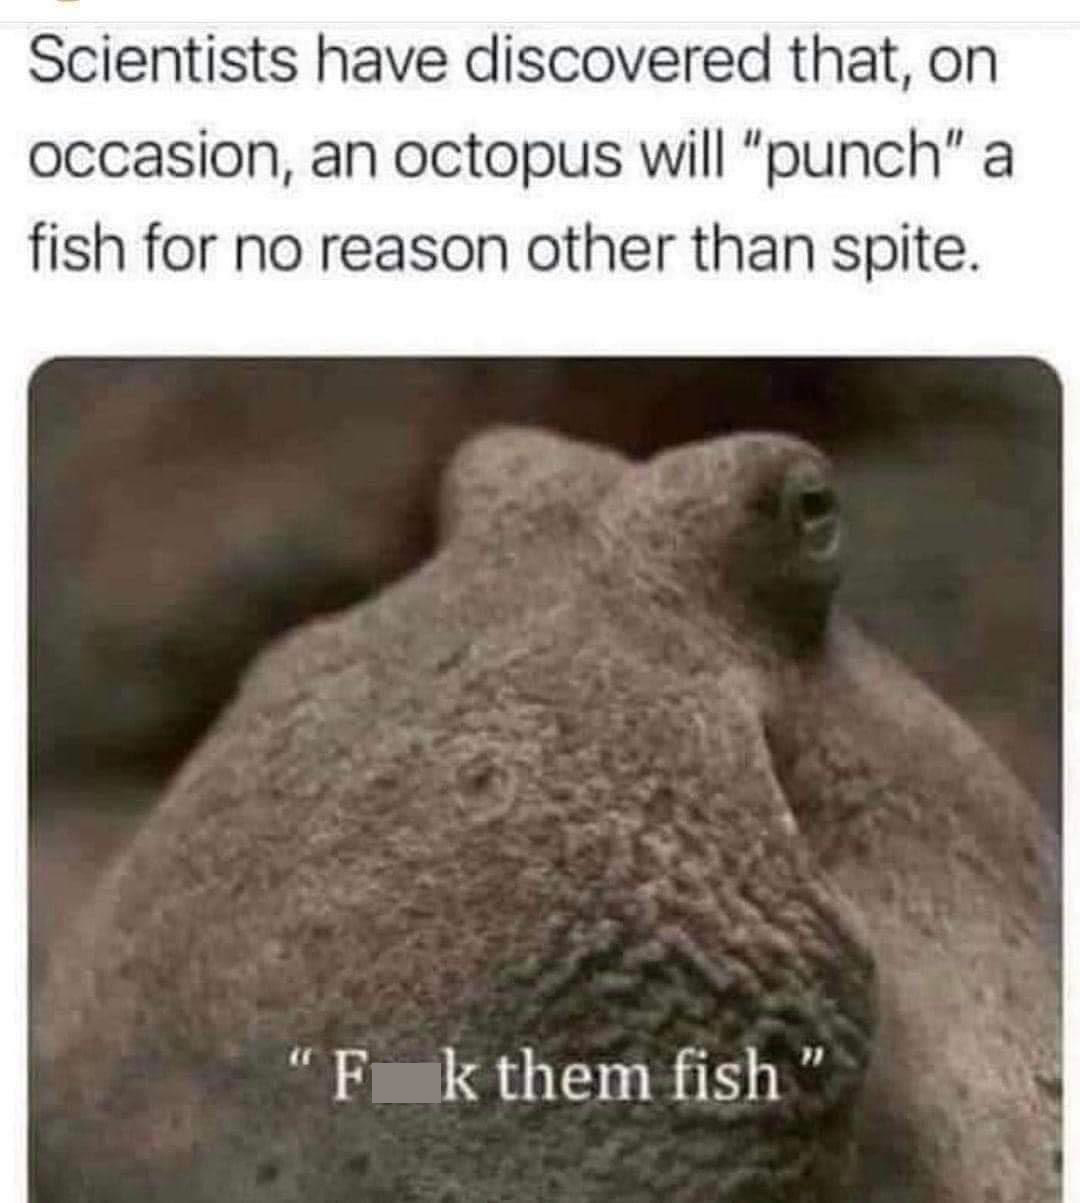 dank memes - funny memes - scientists have discovered that on occasion an octopus will punch a fish - Scientists have discovered that, on occasion, an octopus will